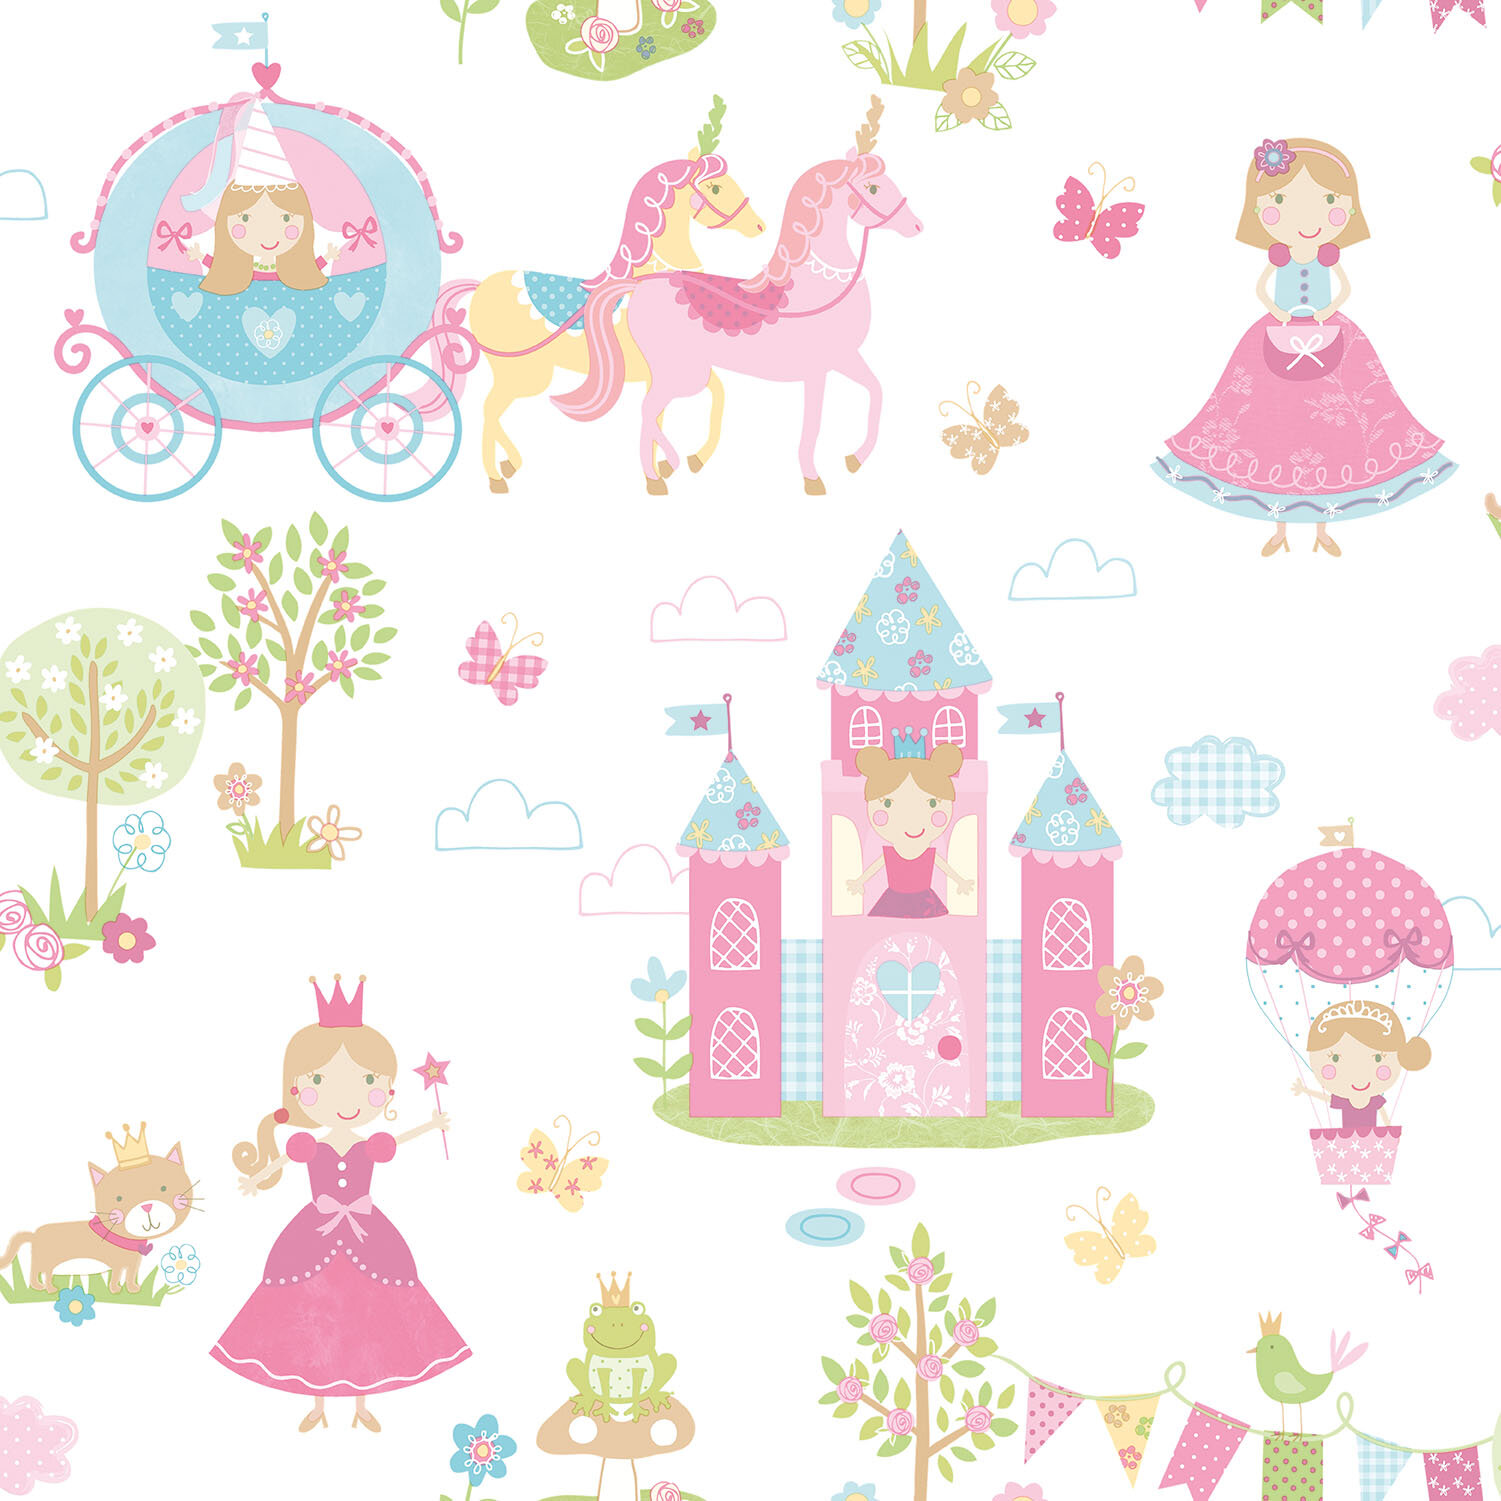 Princess with unicorn horse fairy tale story for girls, fairytales HD  wallpaper | Pxfuel